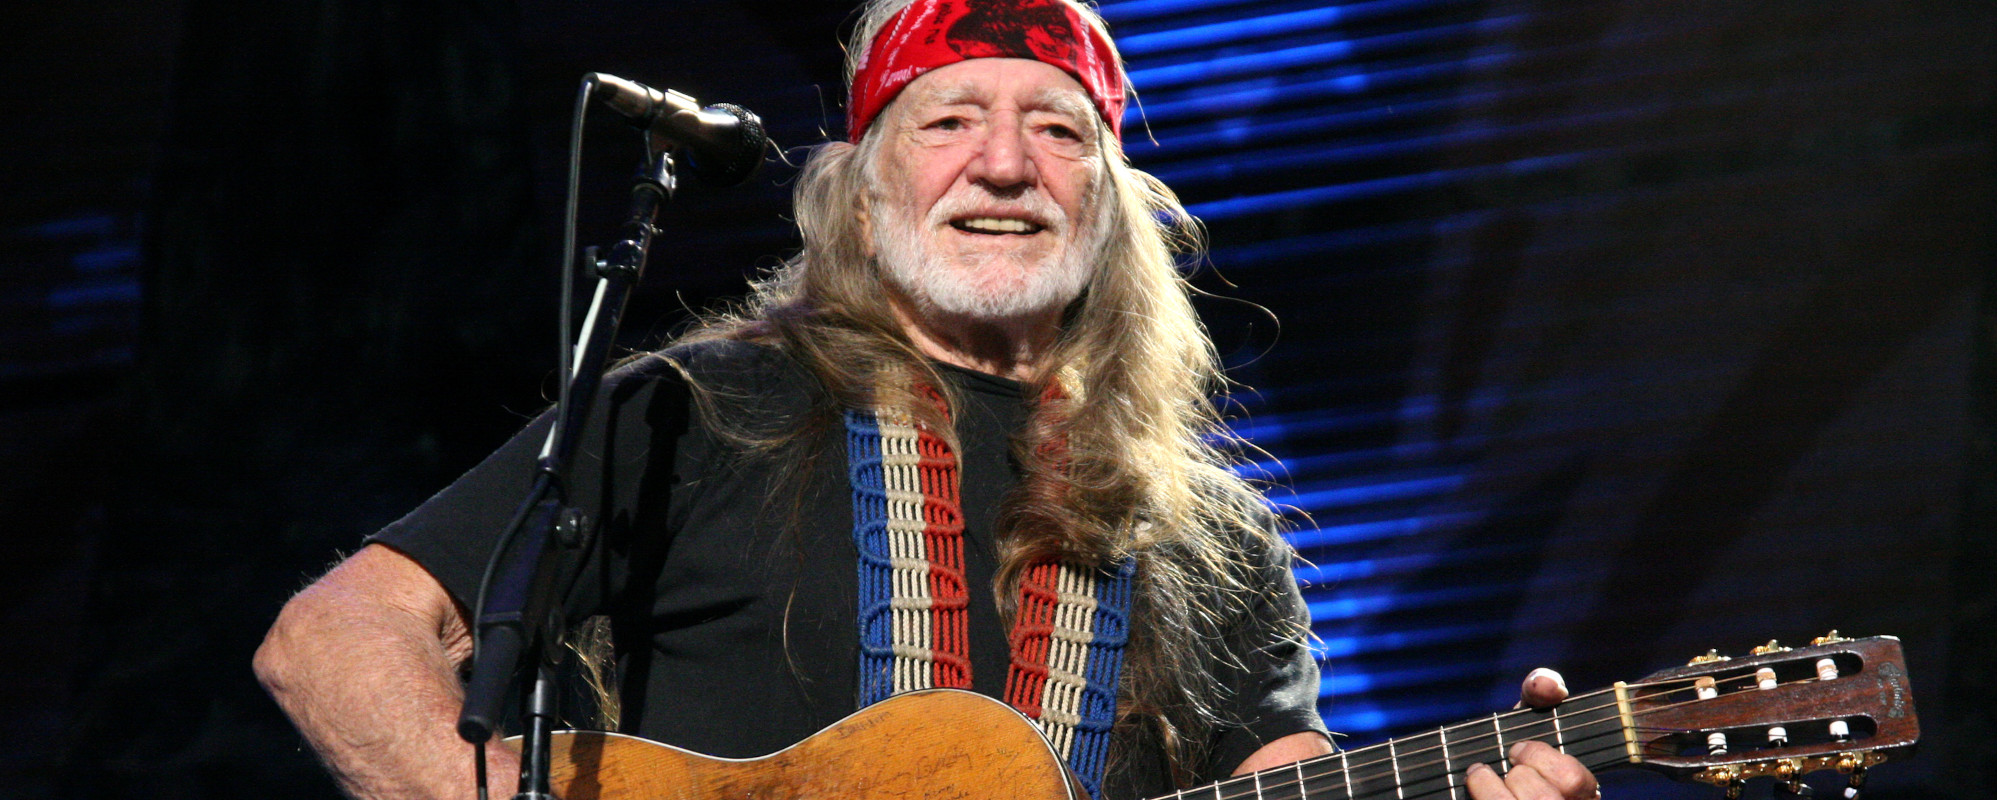 Why Does Willie Nelson Celebrate Two Birthdays A Year?